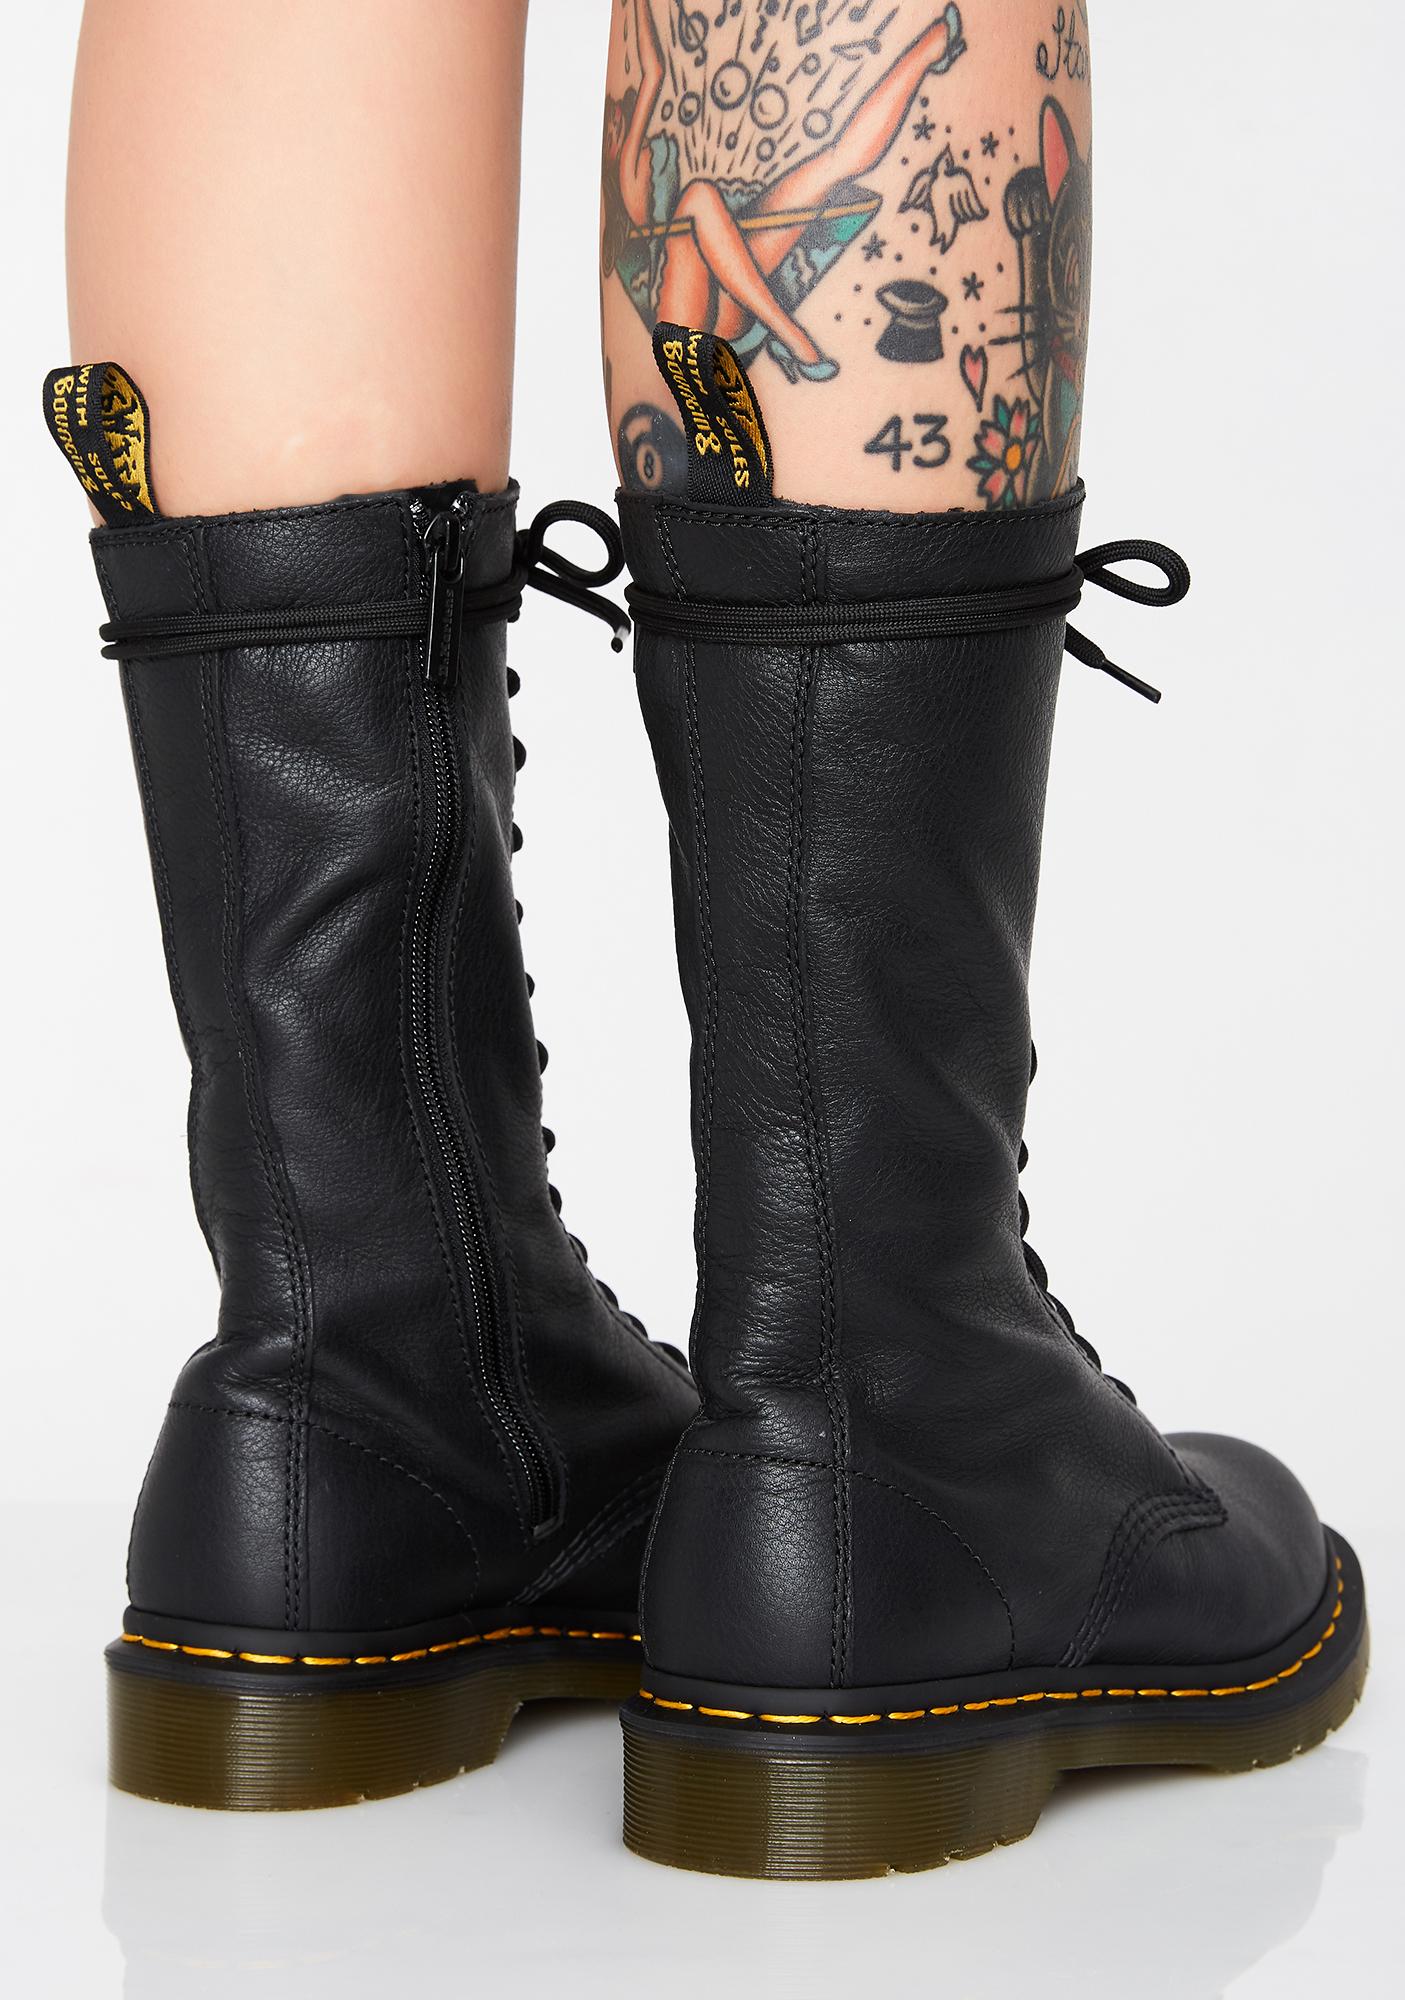 doc martens 14 eye boot laces